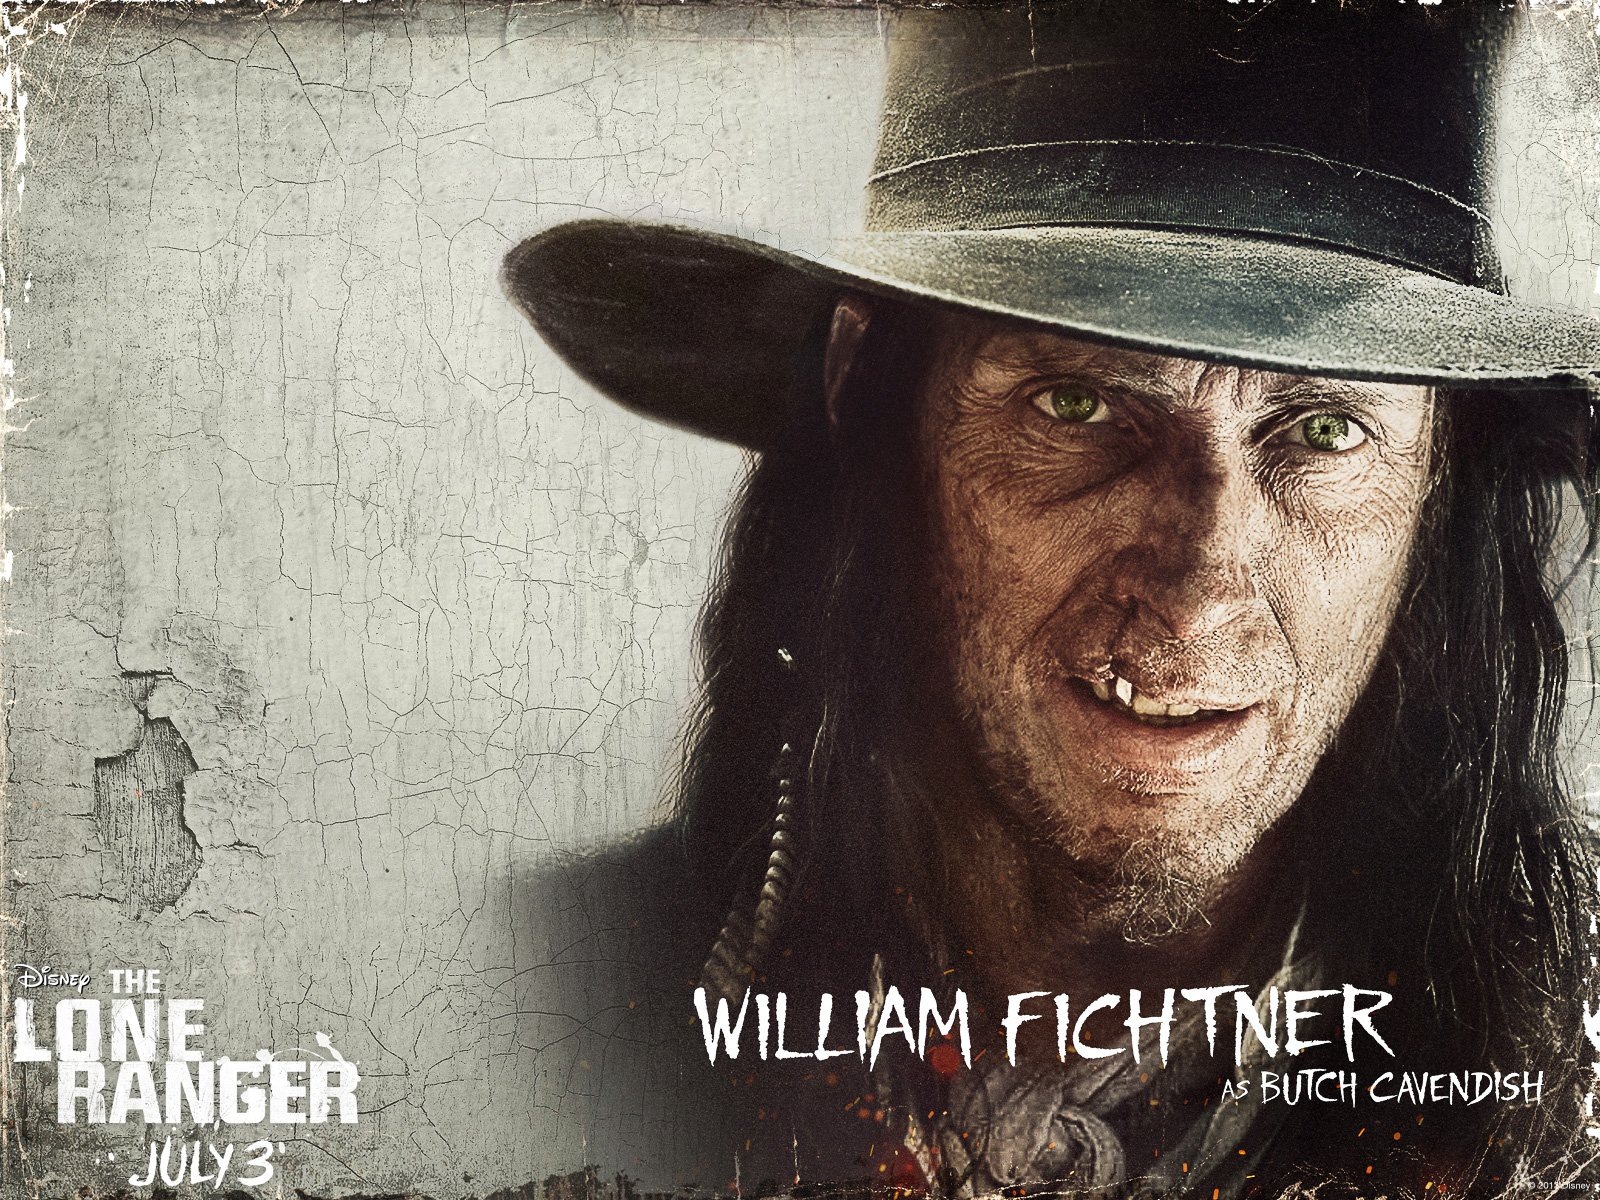 The Lone Ranger HD movie wallpapers #11 - 1600x1200